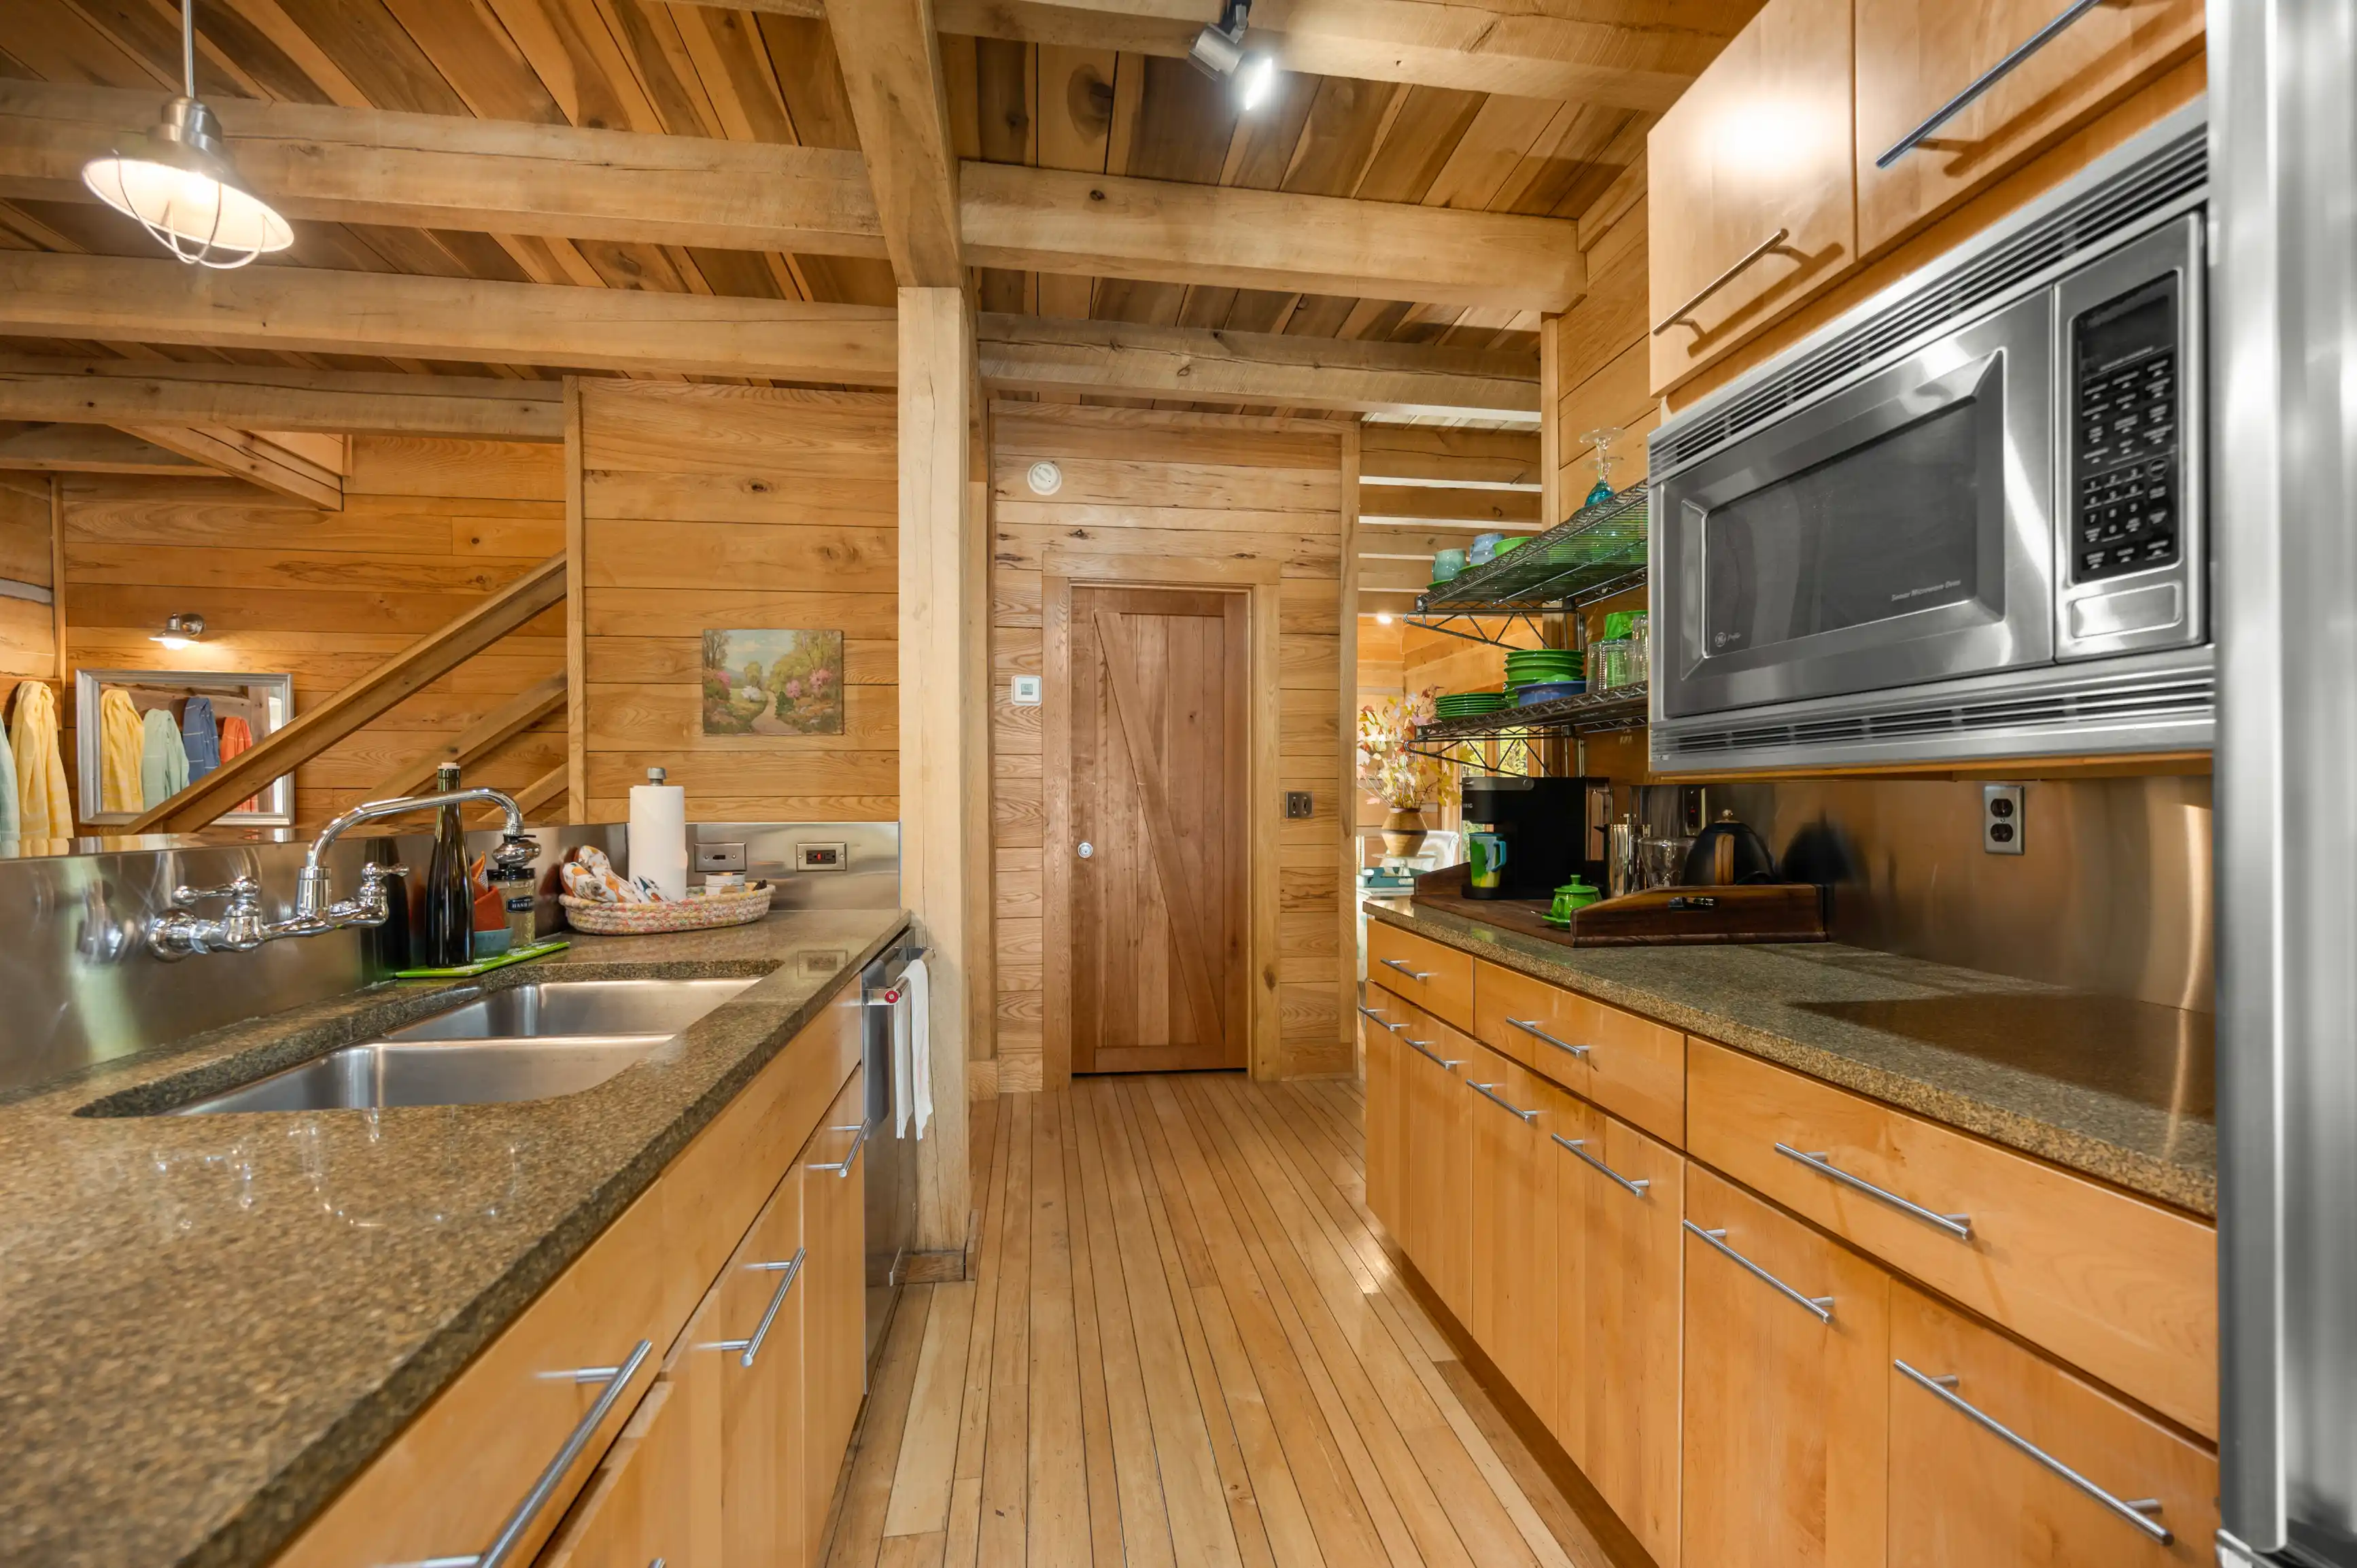 Interior of a cozy wooden cabin kitchen with stainless steel appliances, wooden cabinets, and granite countertops.